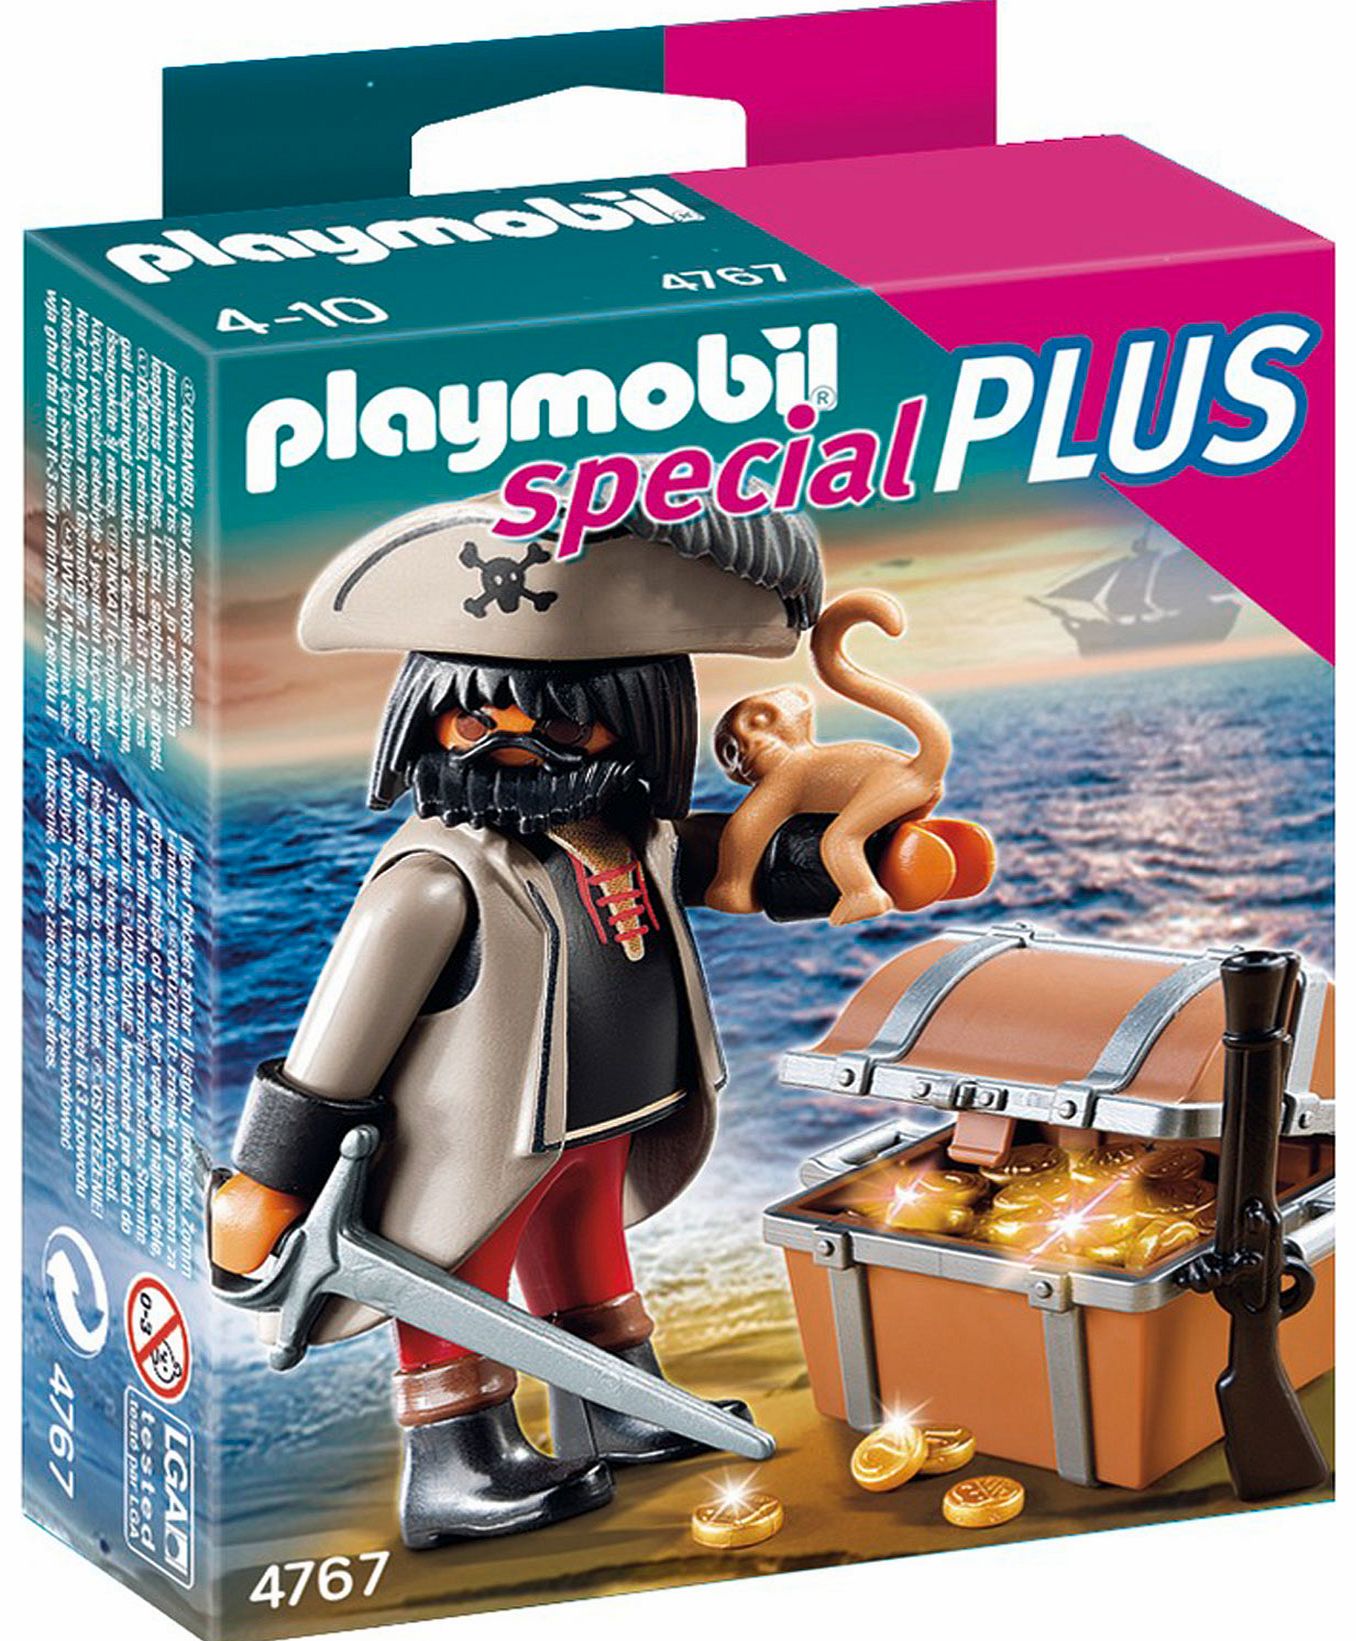 Playmobil Gloomy Pirate with Treasure Chest 4767